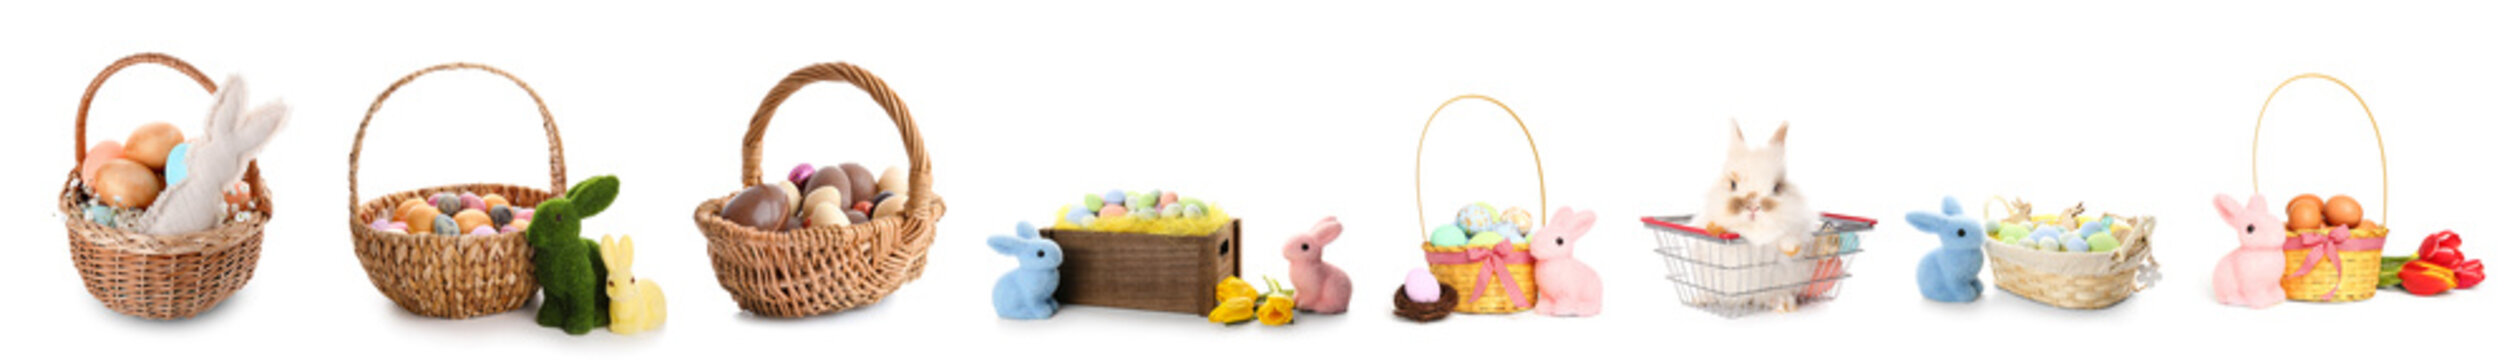 Set of Easter baskets with bunnies and eggs isolated on white